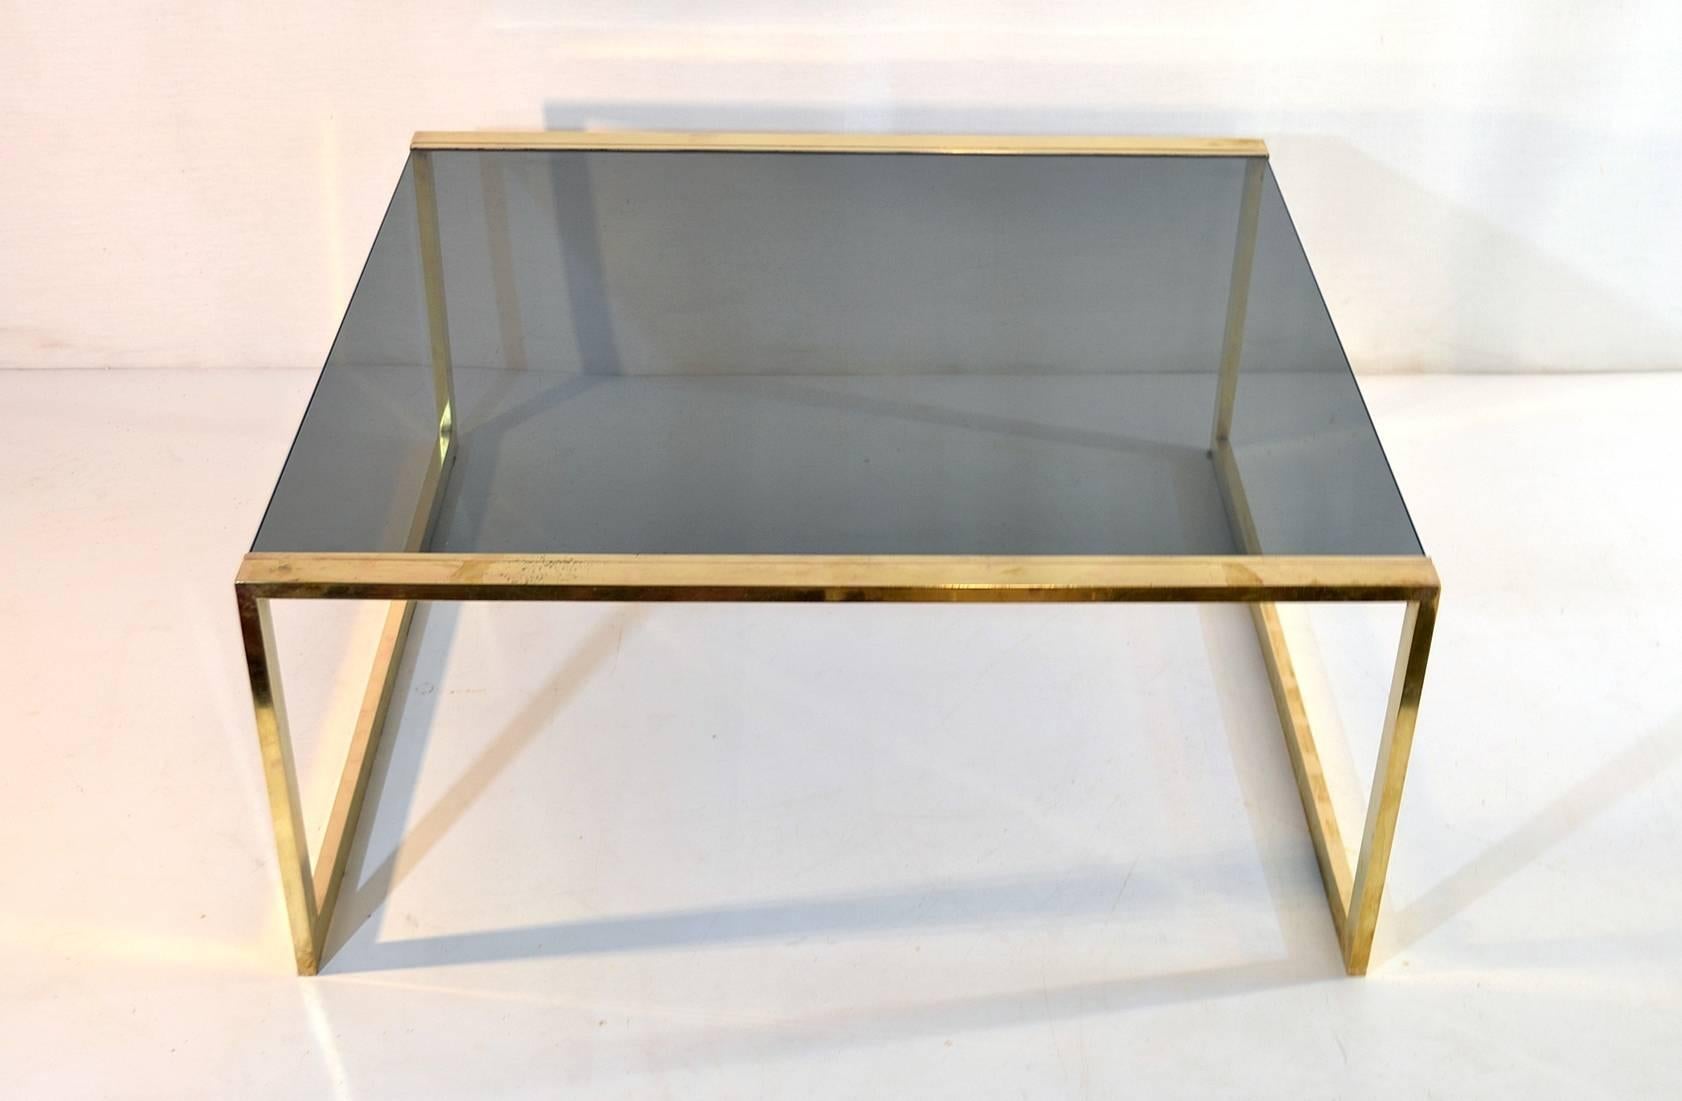 Coffee table with a clean cut design in brass with a smoked glass top in very good condition.